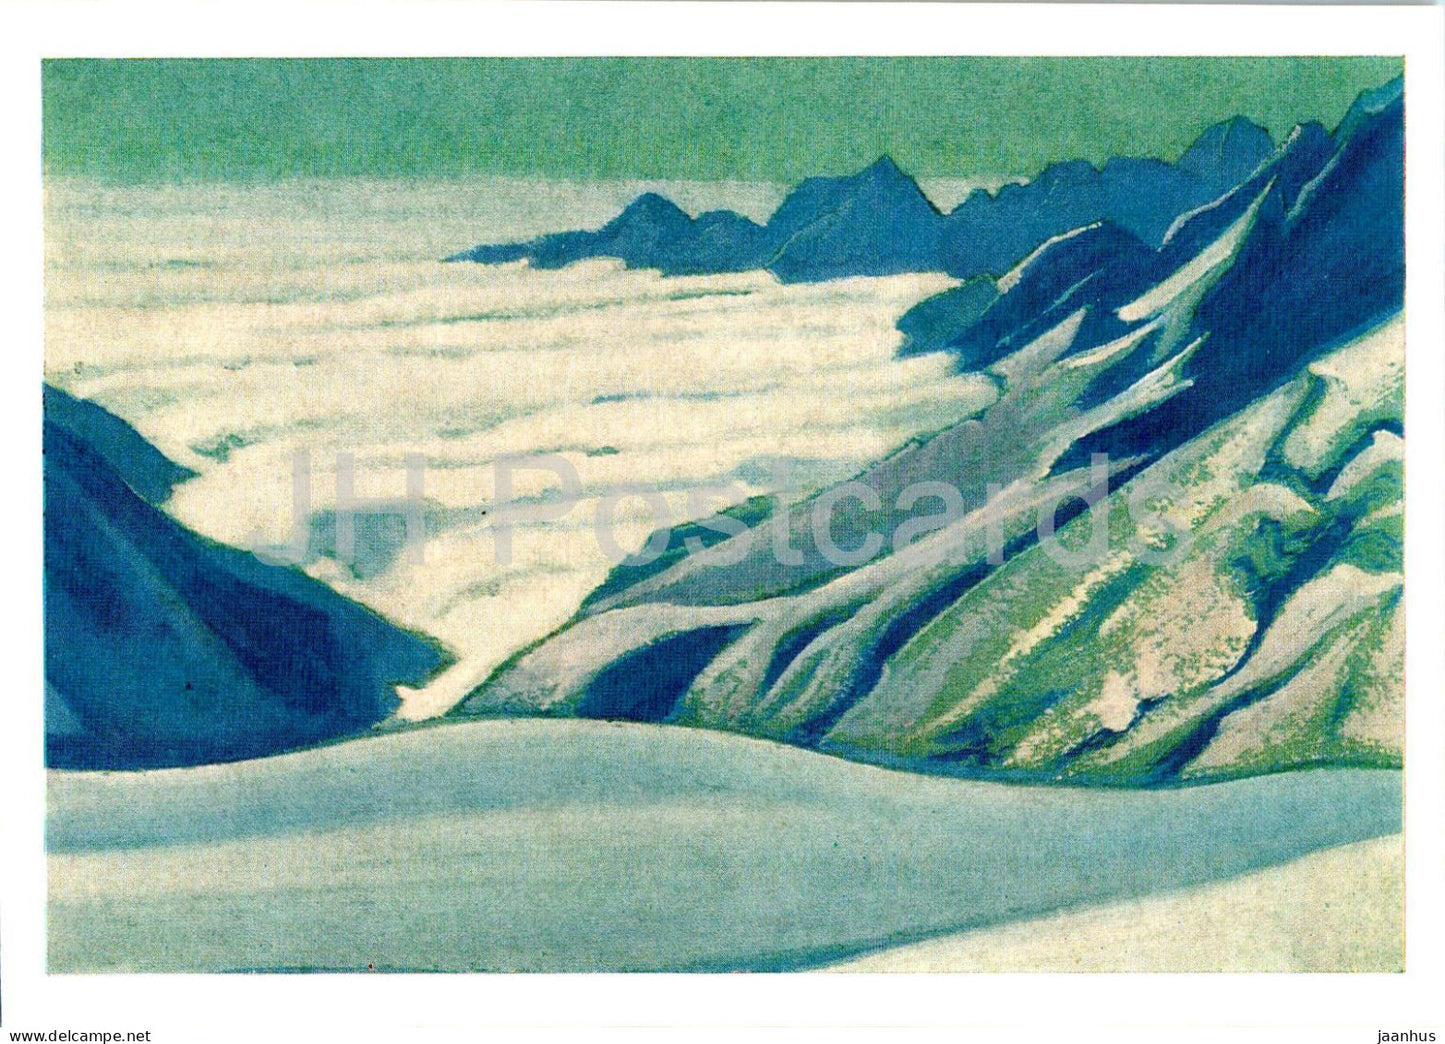 painting by N. Roerich - Snow in the himalayas - Russian art - 1974 - Russia USSR - unused - JH Postcards